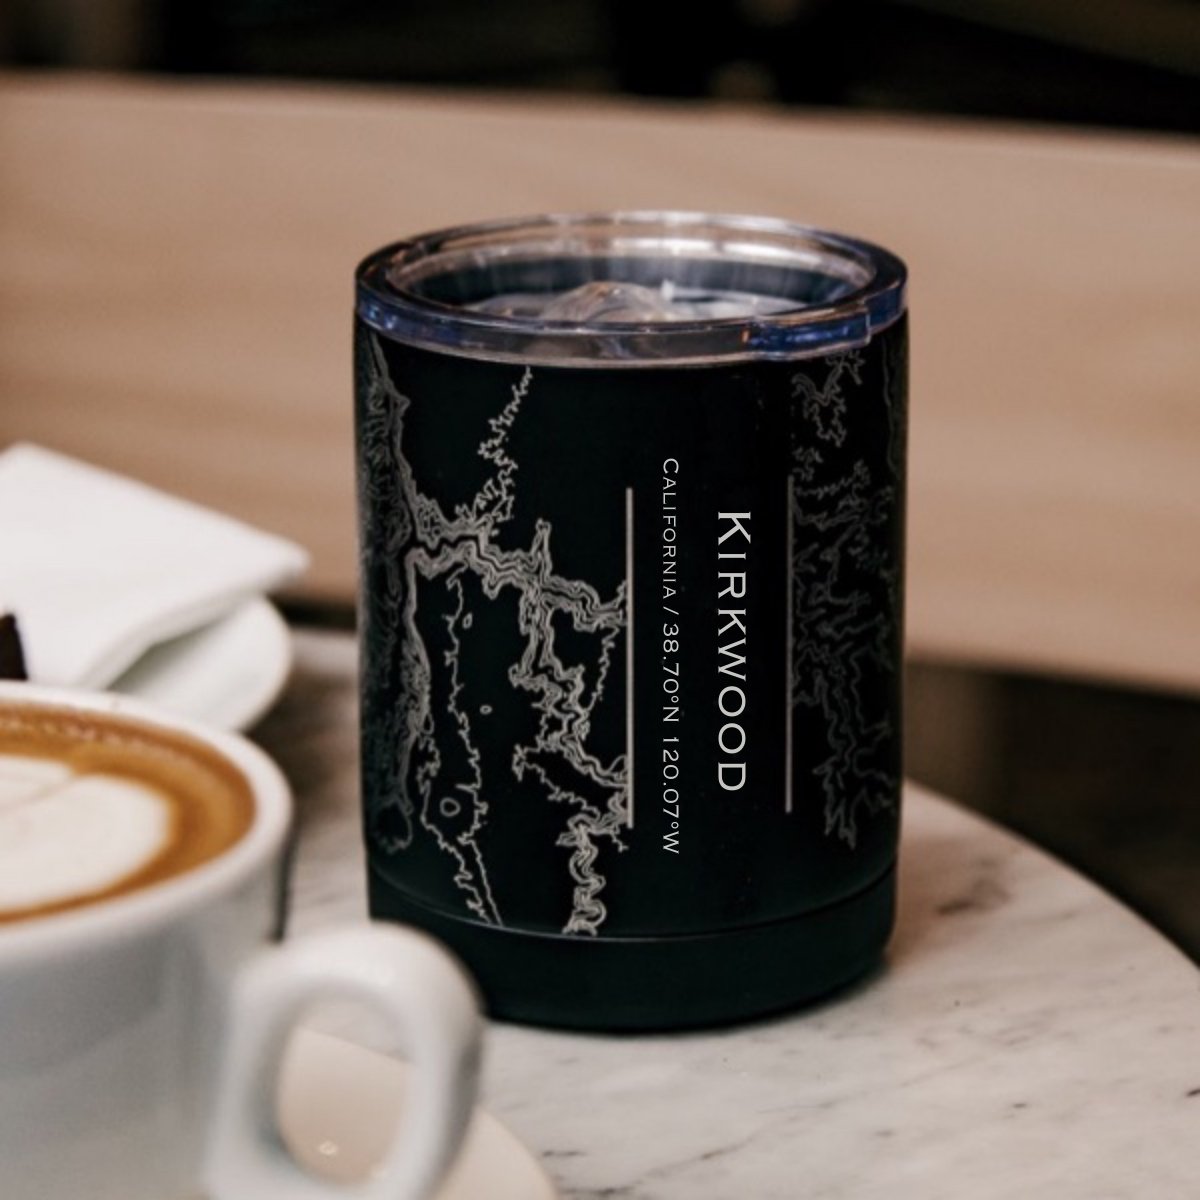 Kirkwood - California Engraved Map Insulated Cup in Matte Black